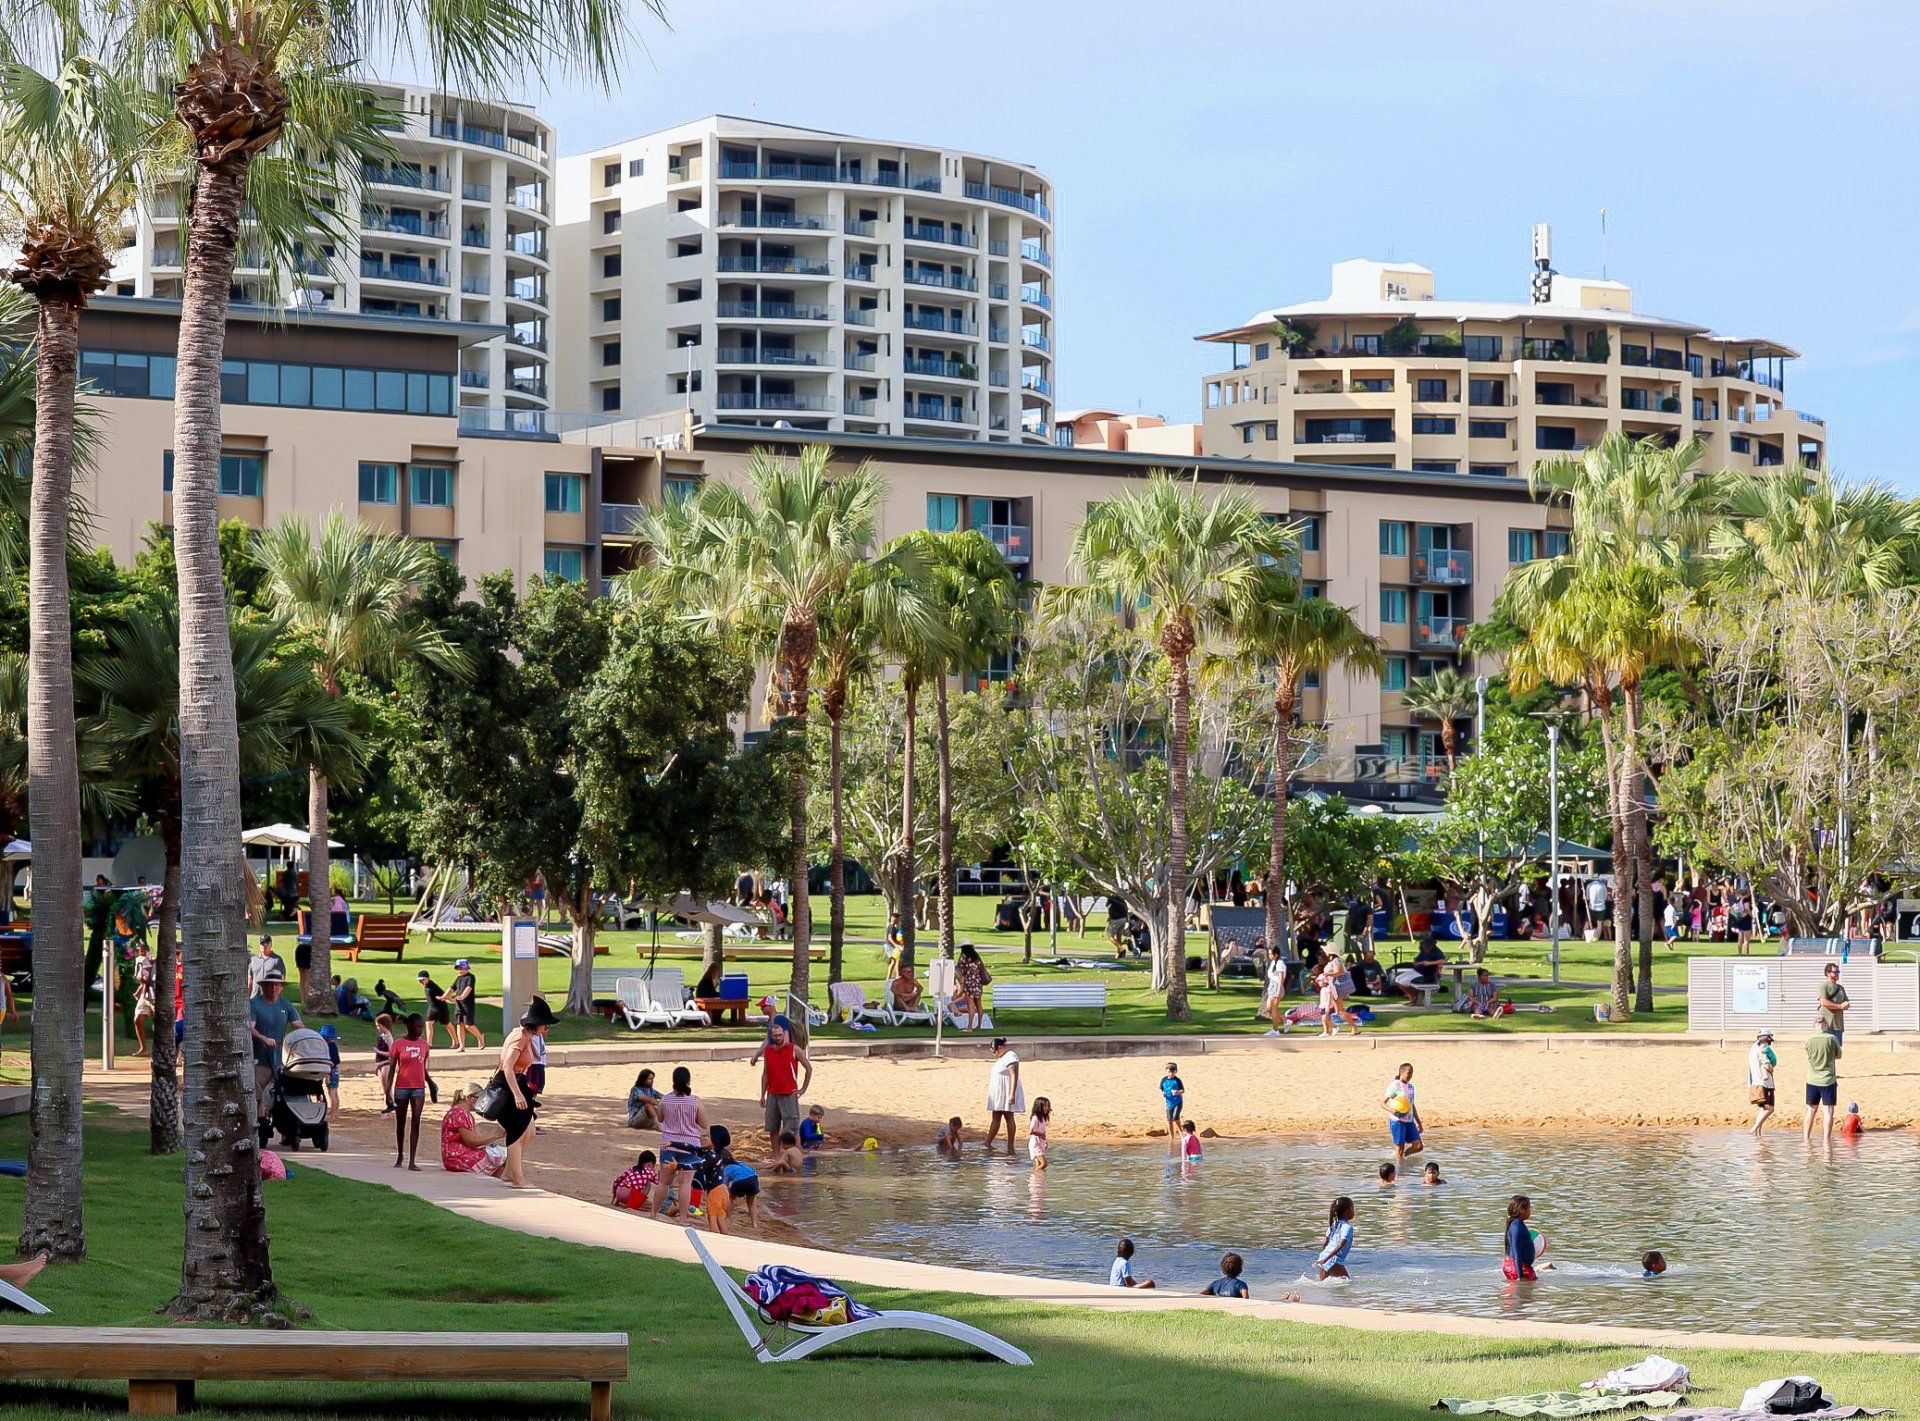 Group of people enjoying the sand and the water at the waterfront. Apartments and high rise buildings are in the background